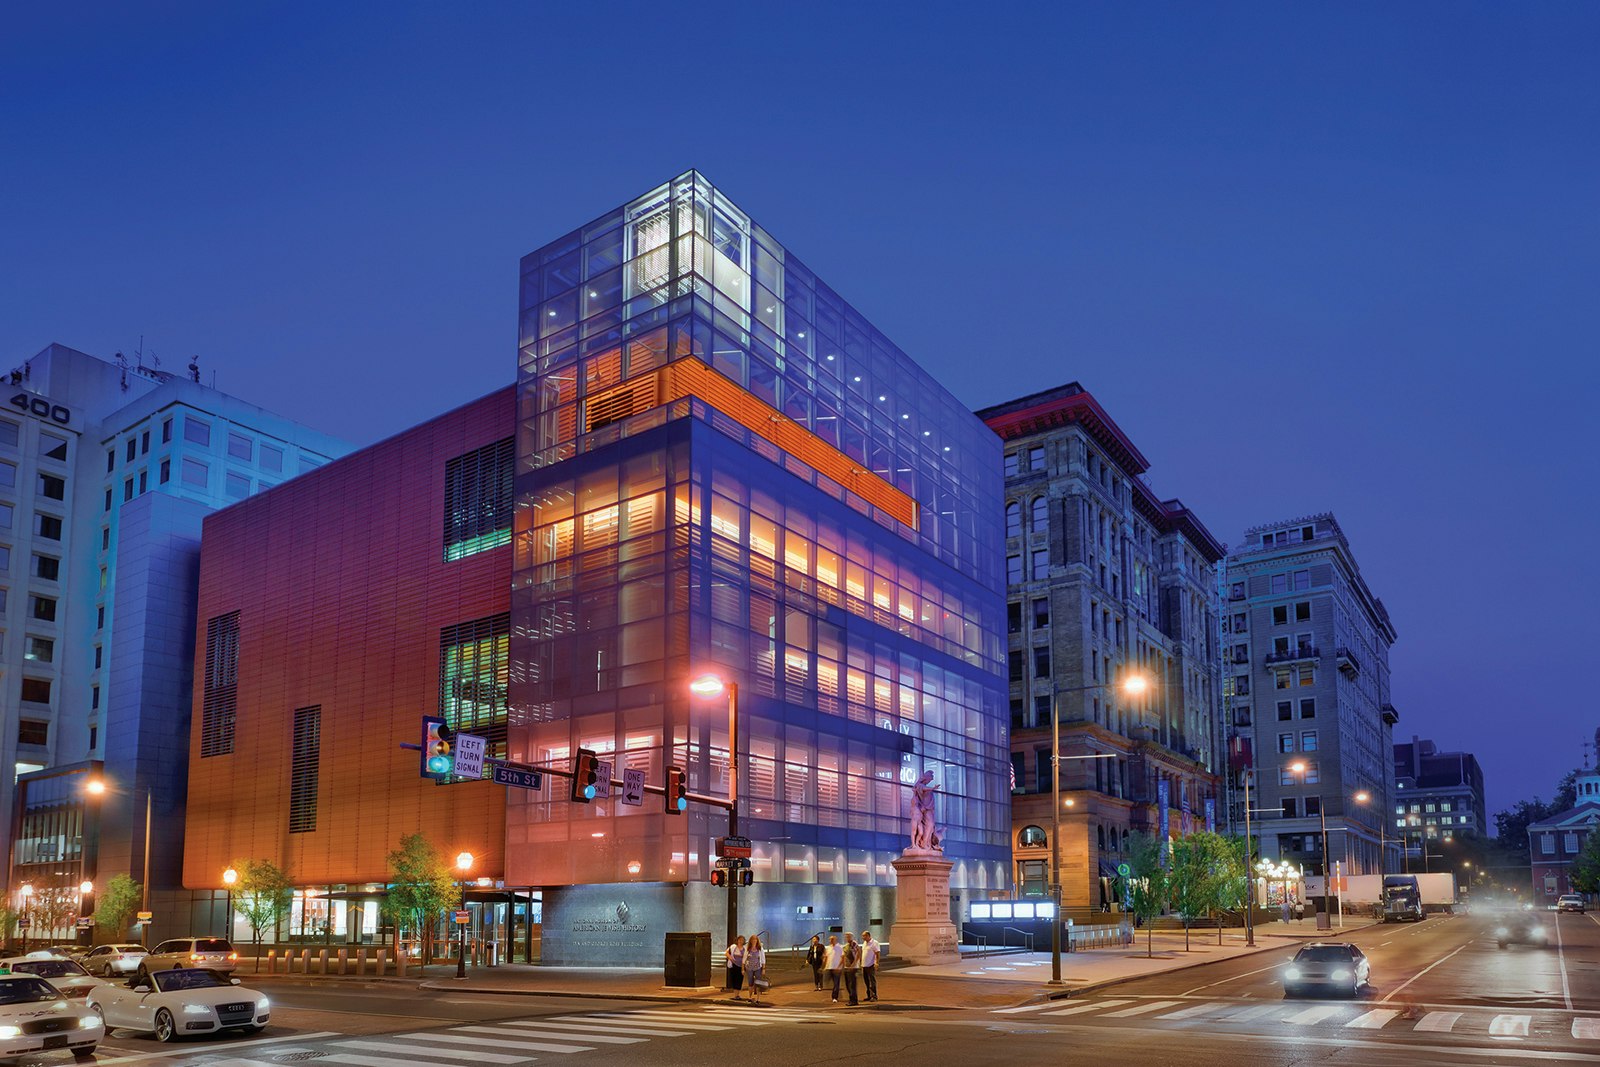 the glass facade of the National Museum of Jewish American History in Philadelphia, lit up in purples and blues at dusk © G. Widman for GPTMC